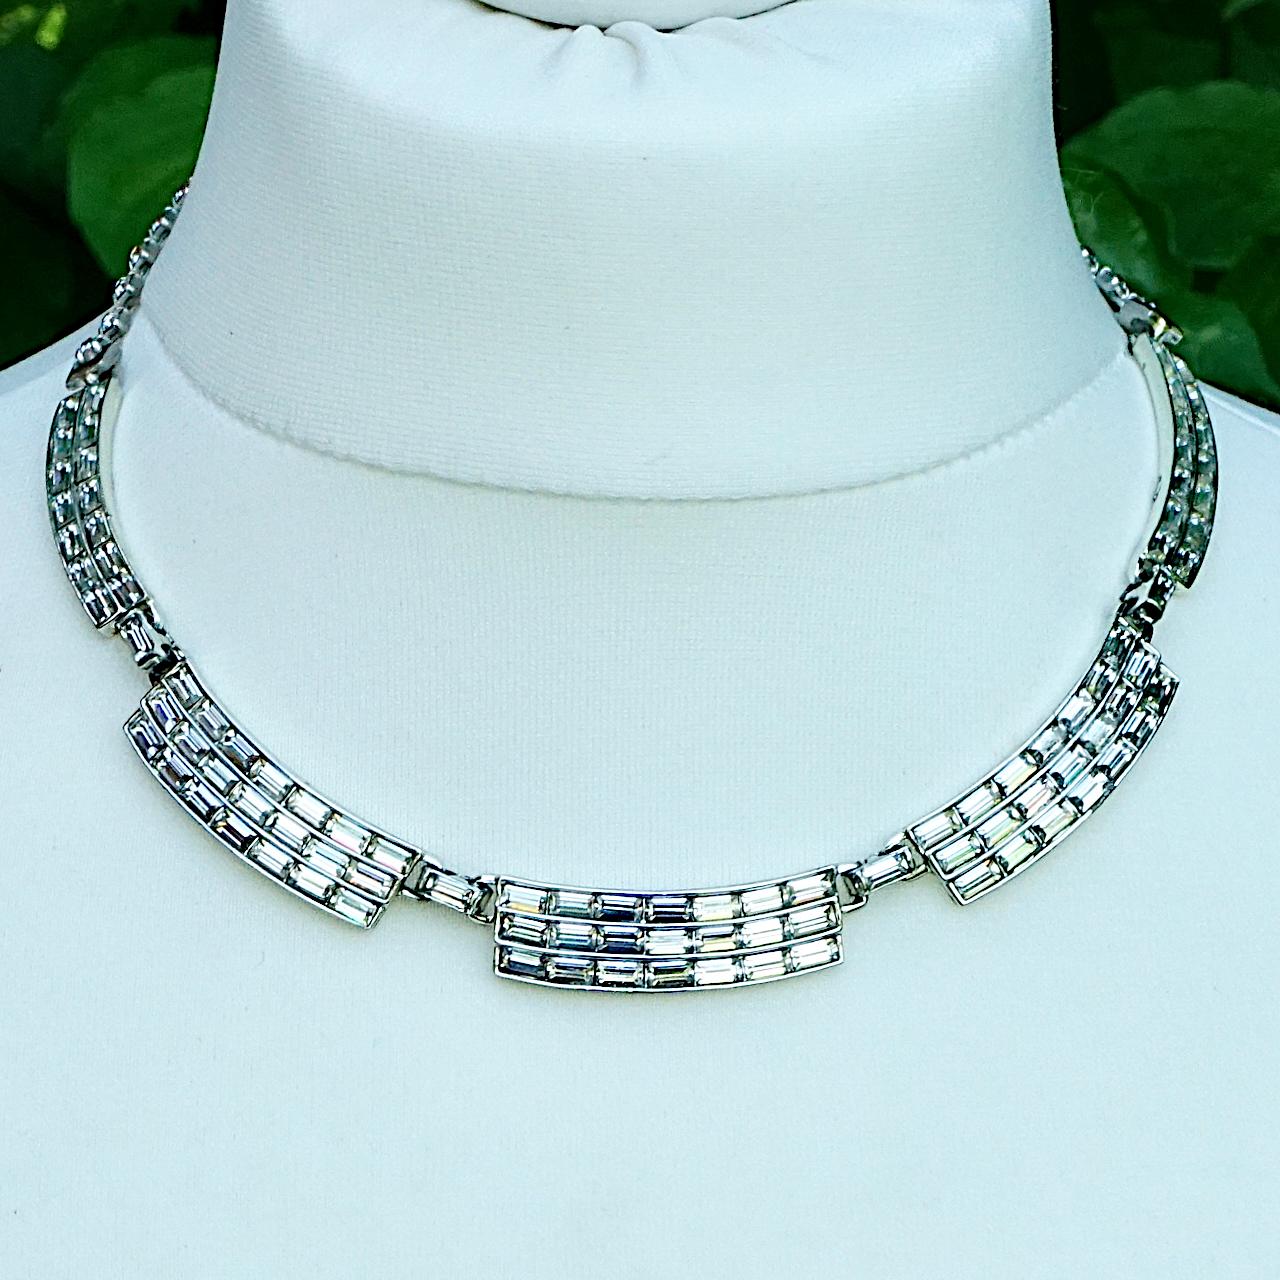 
Wonderful silver plated necklace featuring five curved bar links set with baguette rhinestones, and an adjustable rhinestone extension chain. Measuring length is 42 cm / 16.5 inches including the extension chain, and width 1.05 cm / .4 inch. There